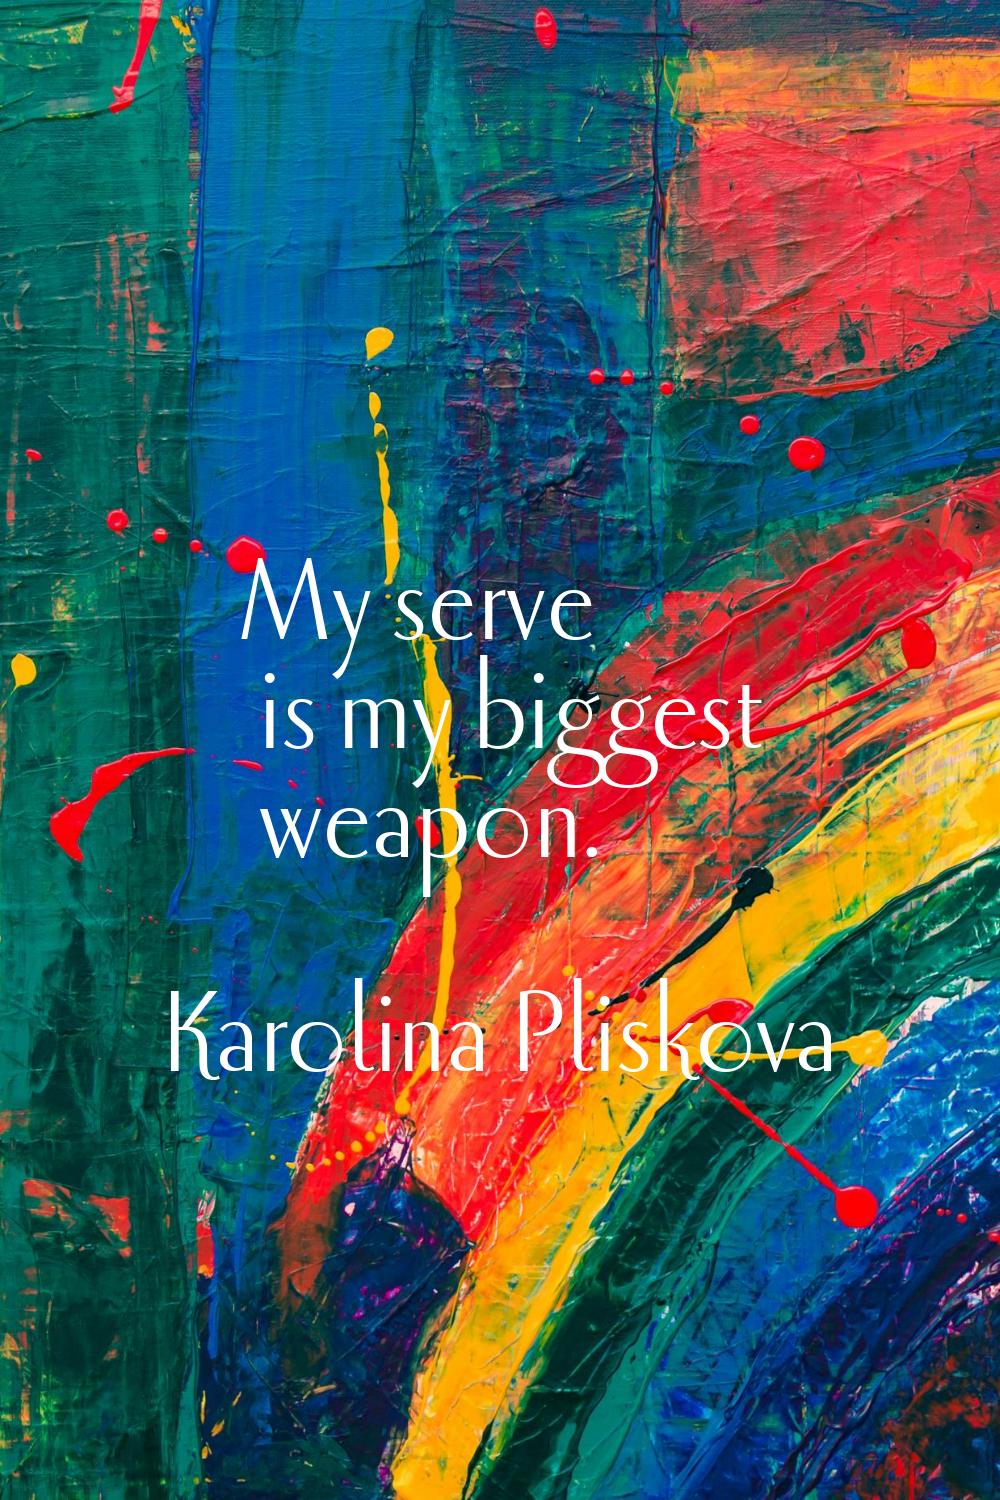 My serve is my biggest weapon.